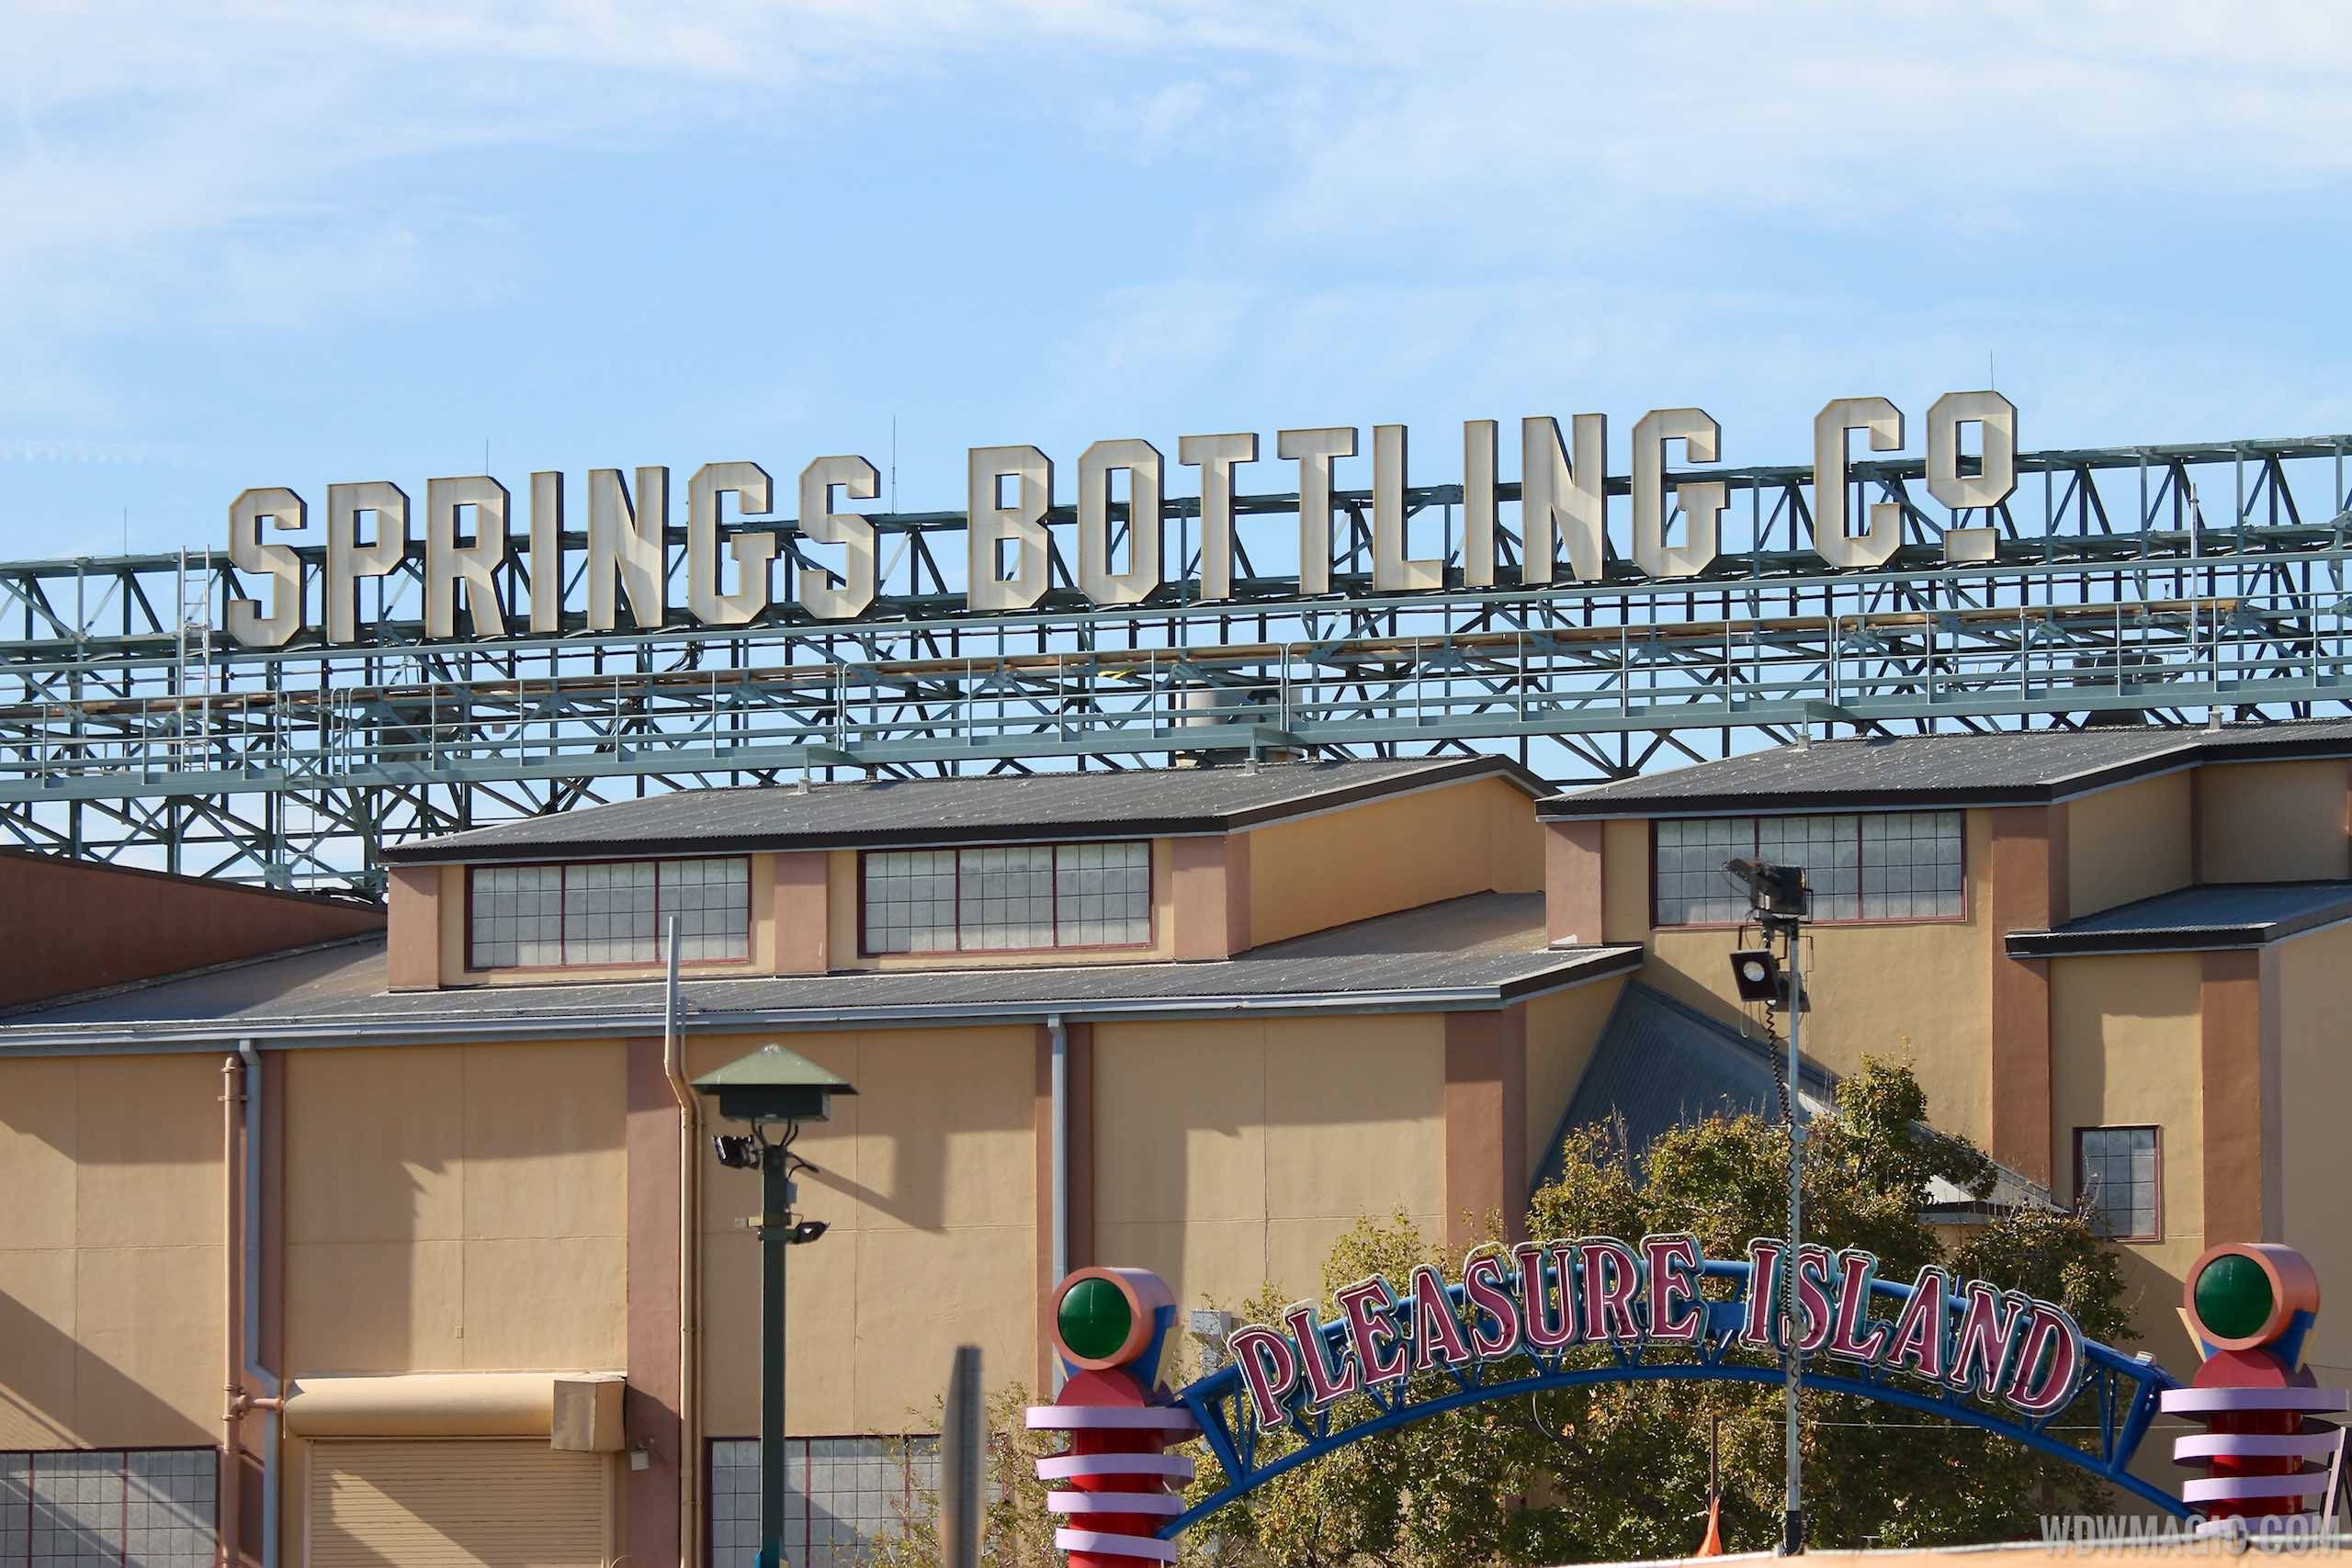 PHOTOS - Springs Bottling Co signage now up at Disney Springs